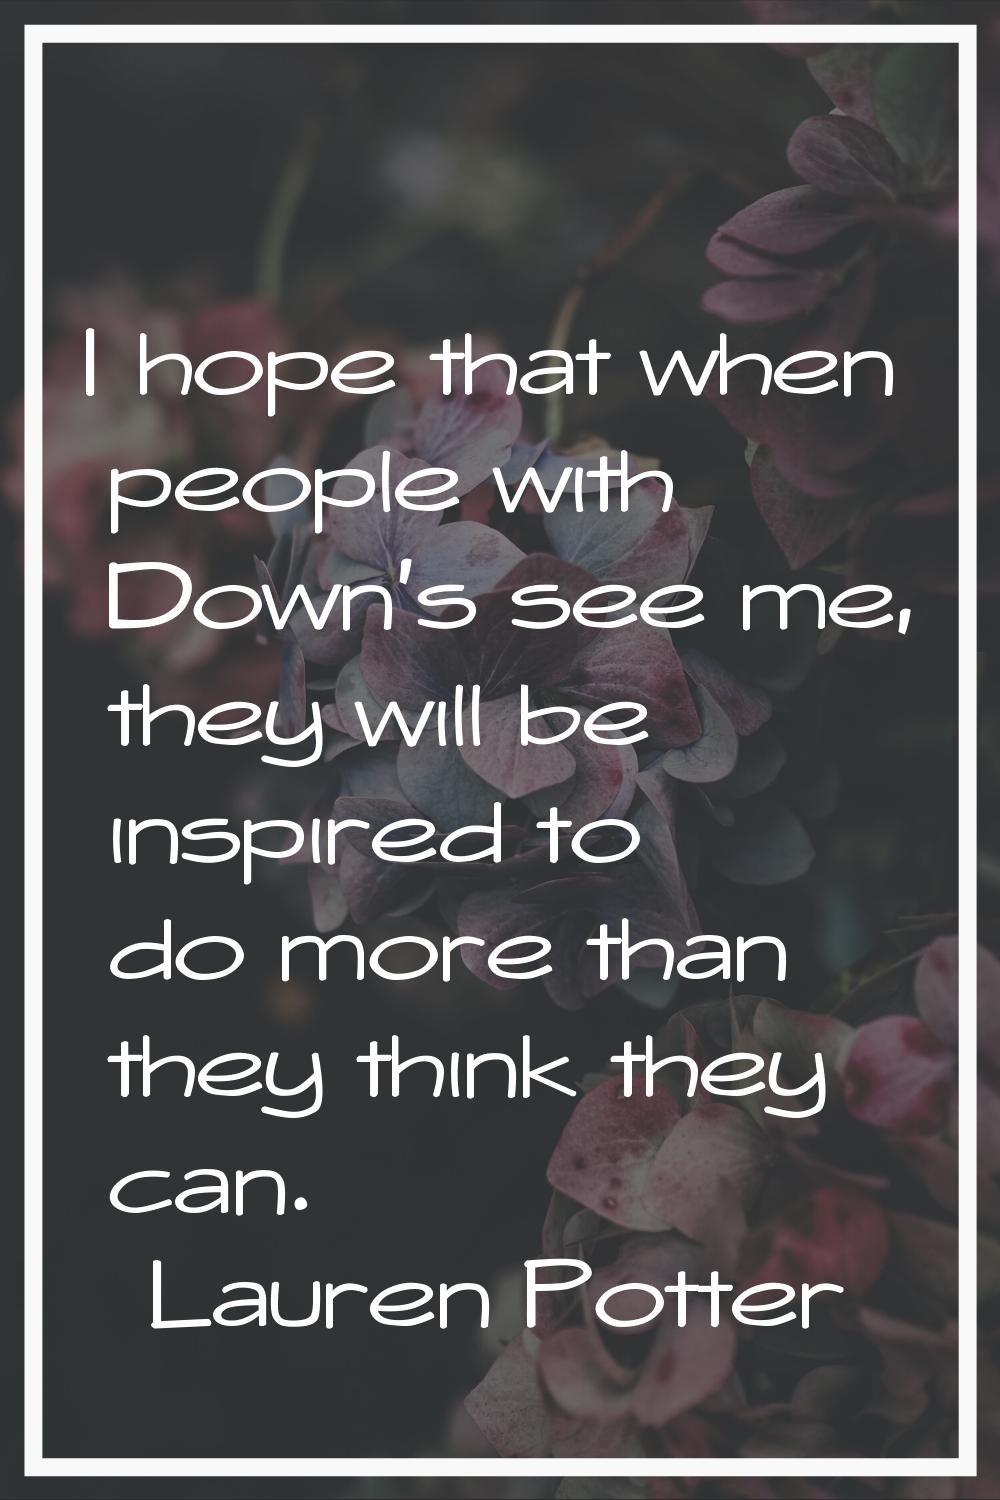 I hope that when people with Down's see me, they will be inspired to do more than they think they c